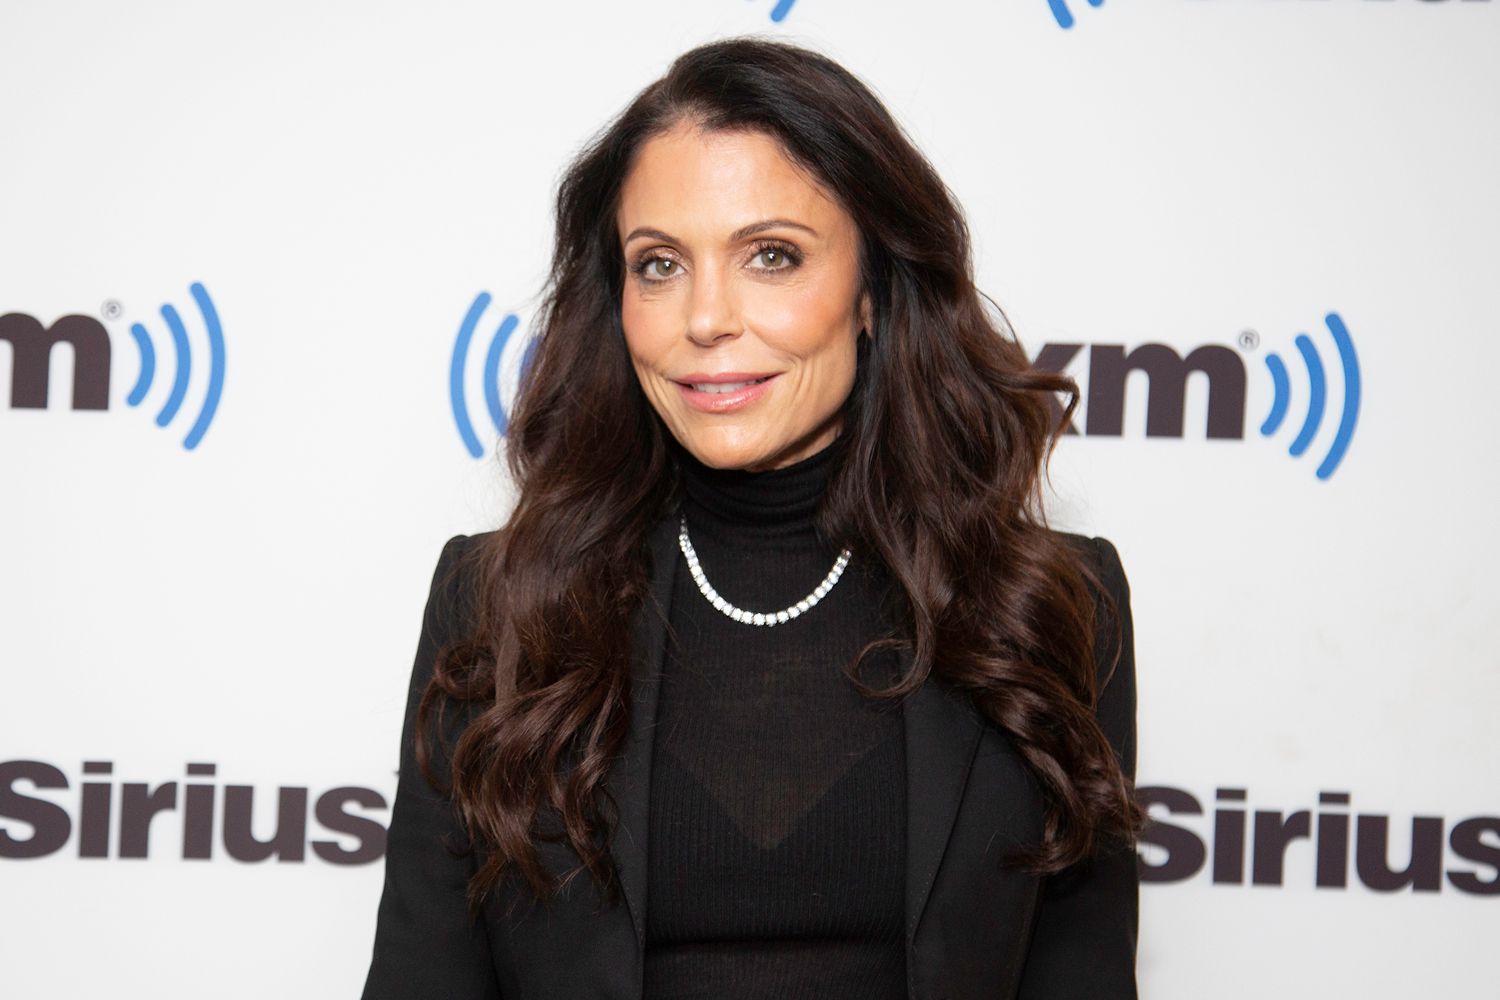 Bethenny Frankel Firmly Believes No One 'Owes' Anyone an Explanation for Cosmetic Surgery: 'Live Your Life' (Exclusive)